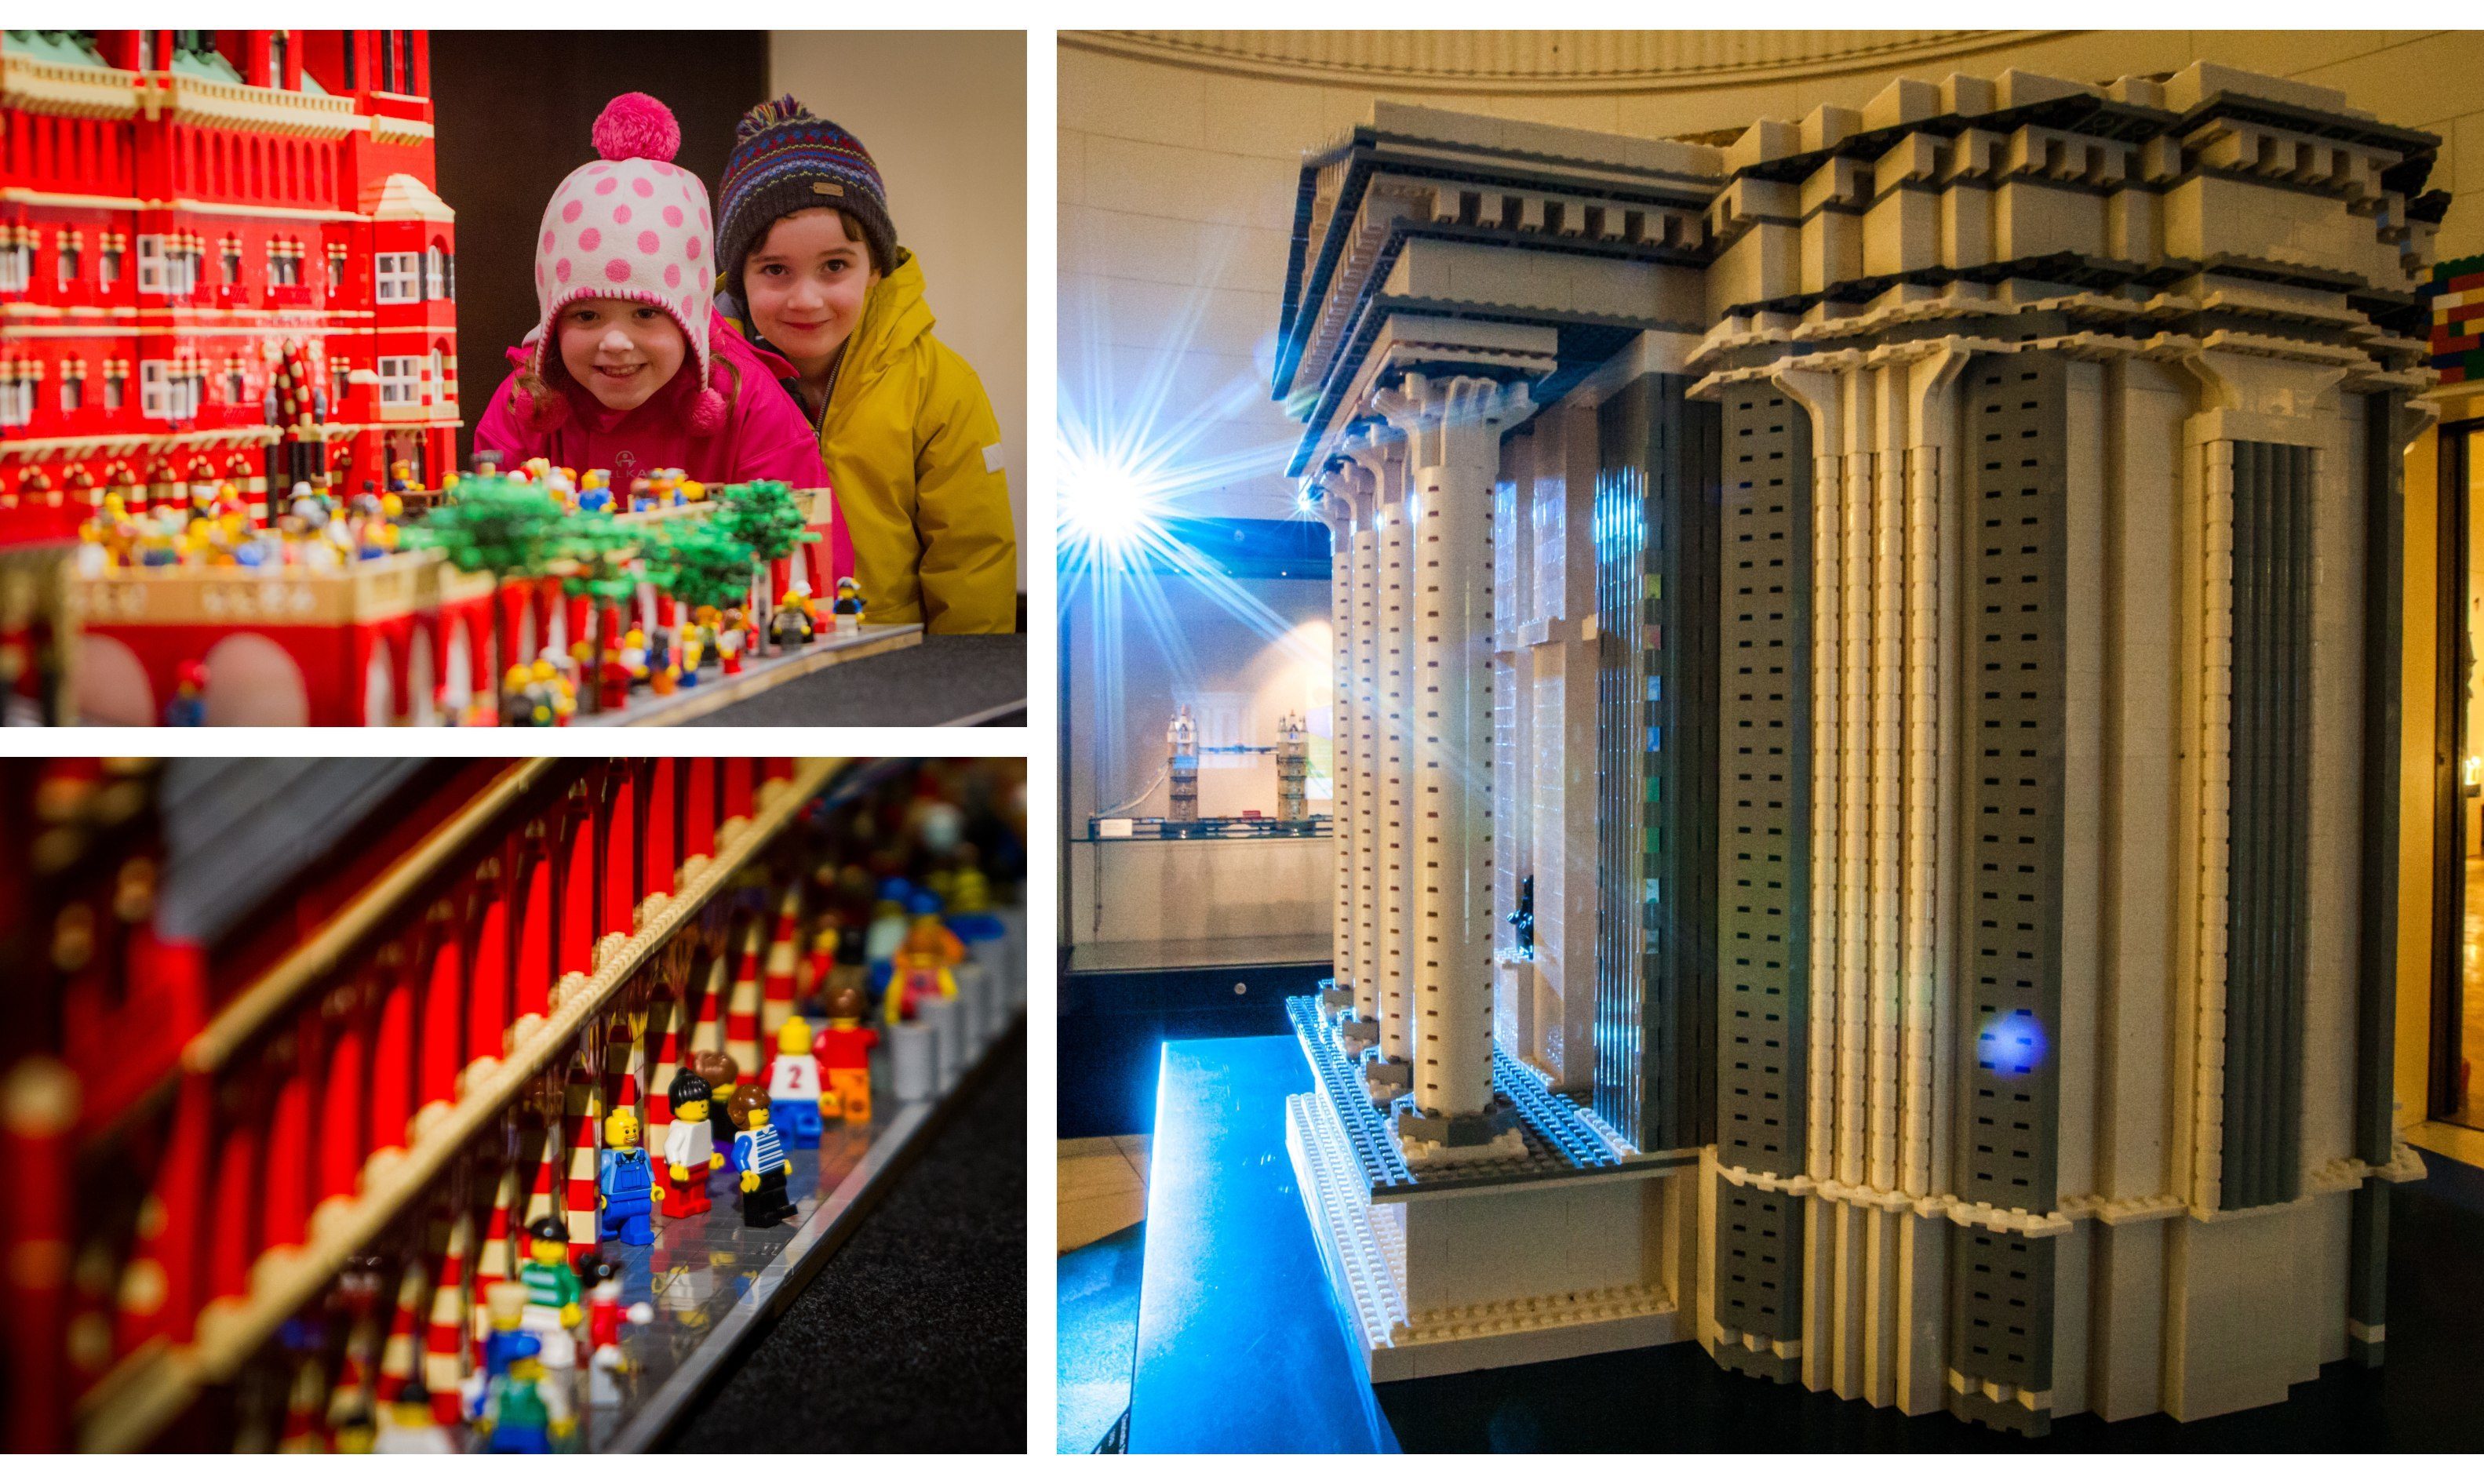 LEGO's Brick City is coming to Dundee.